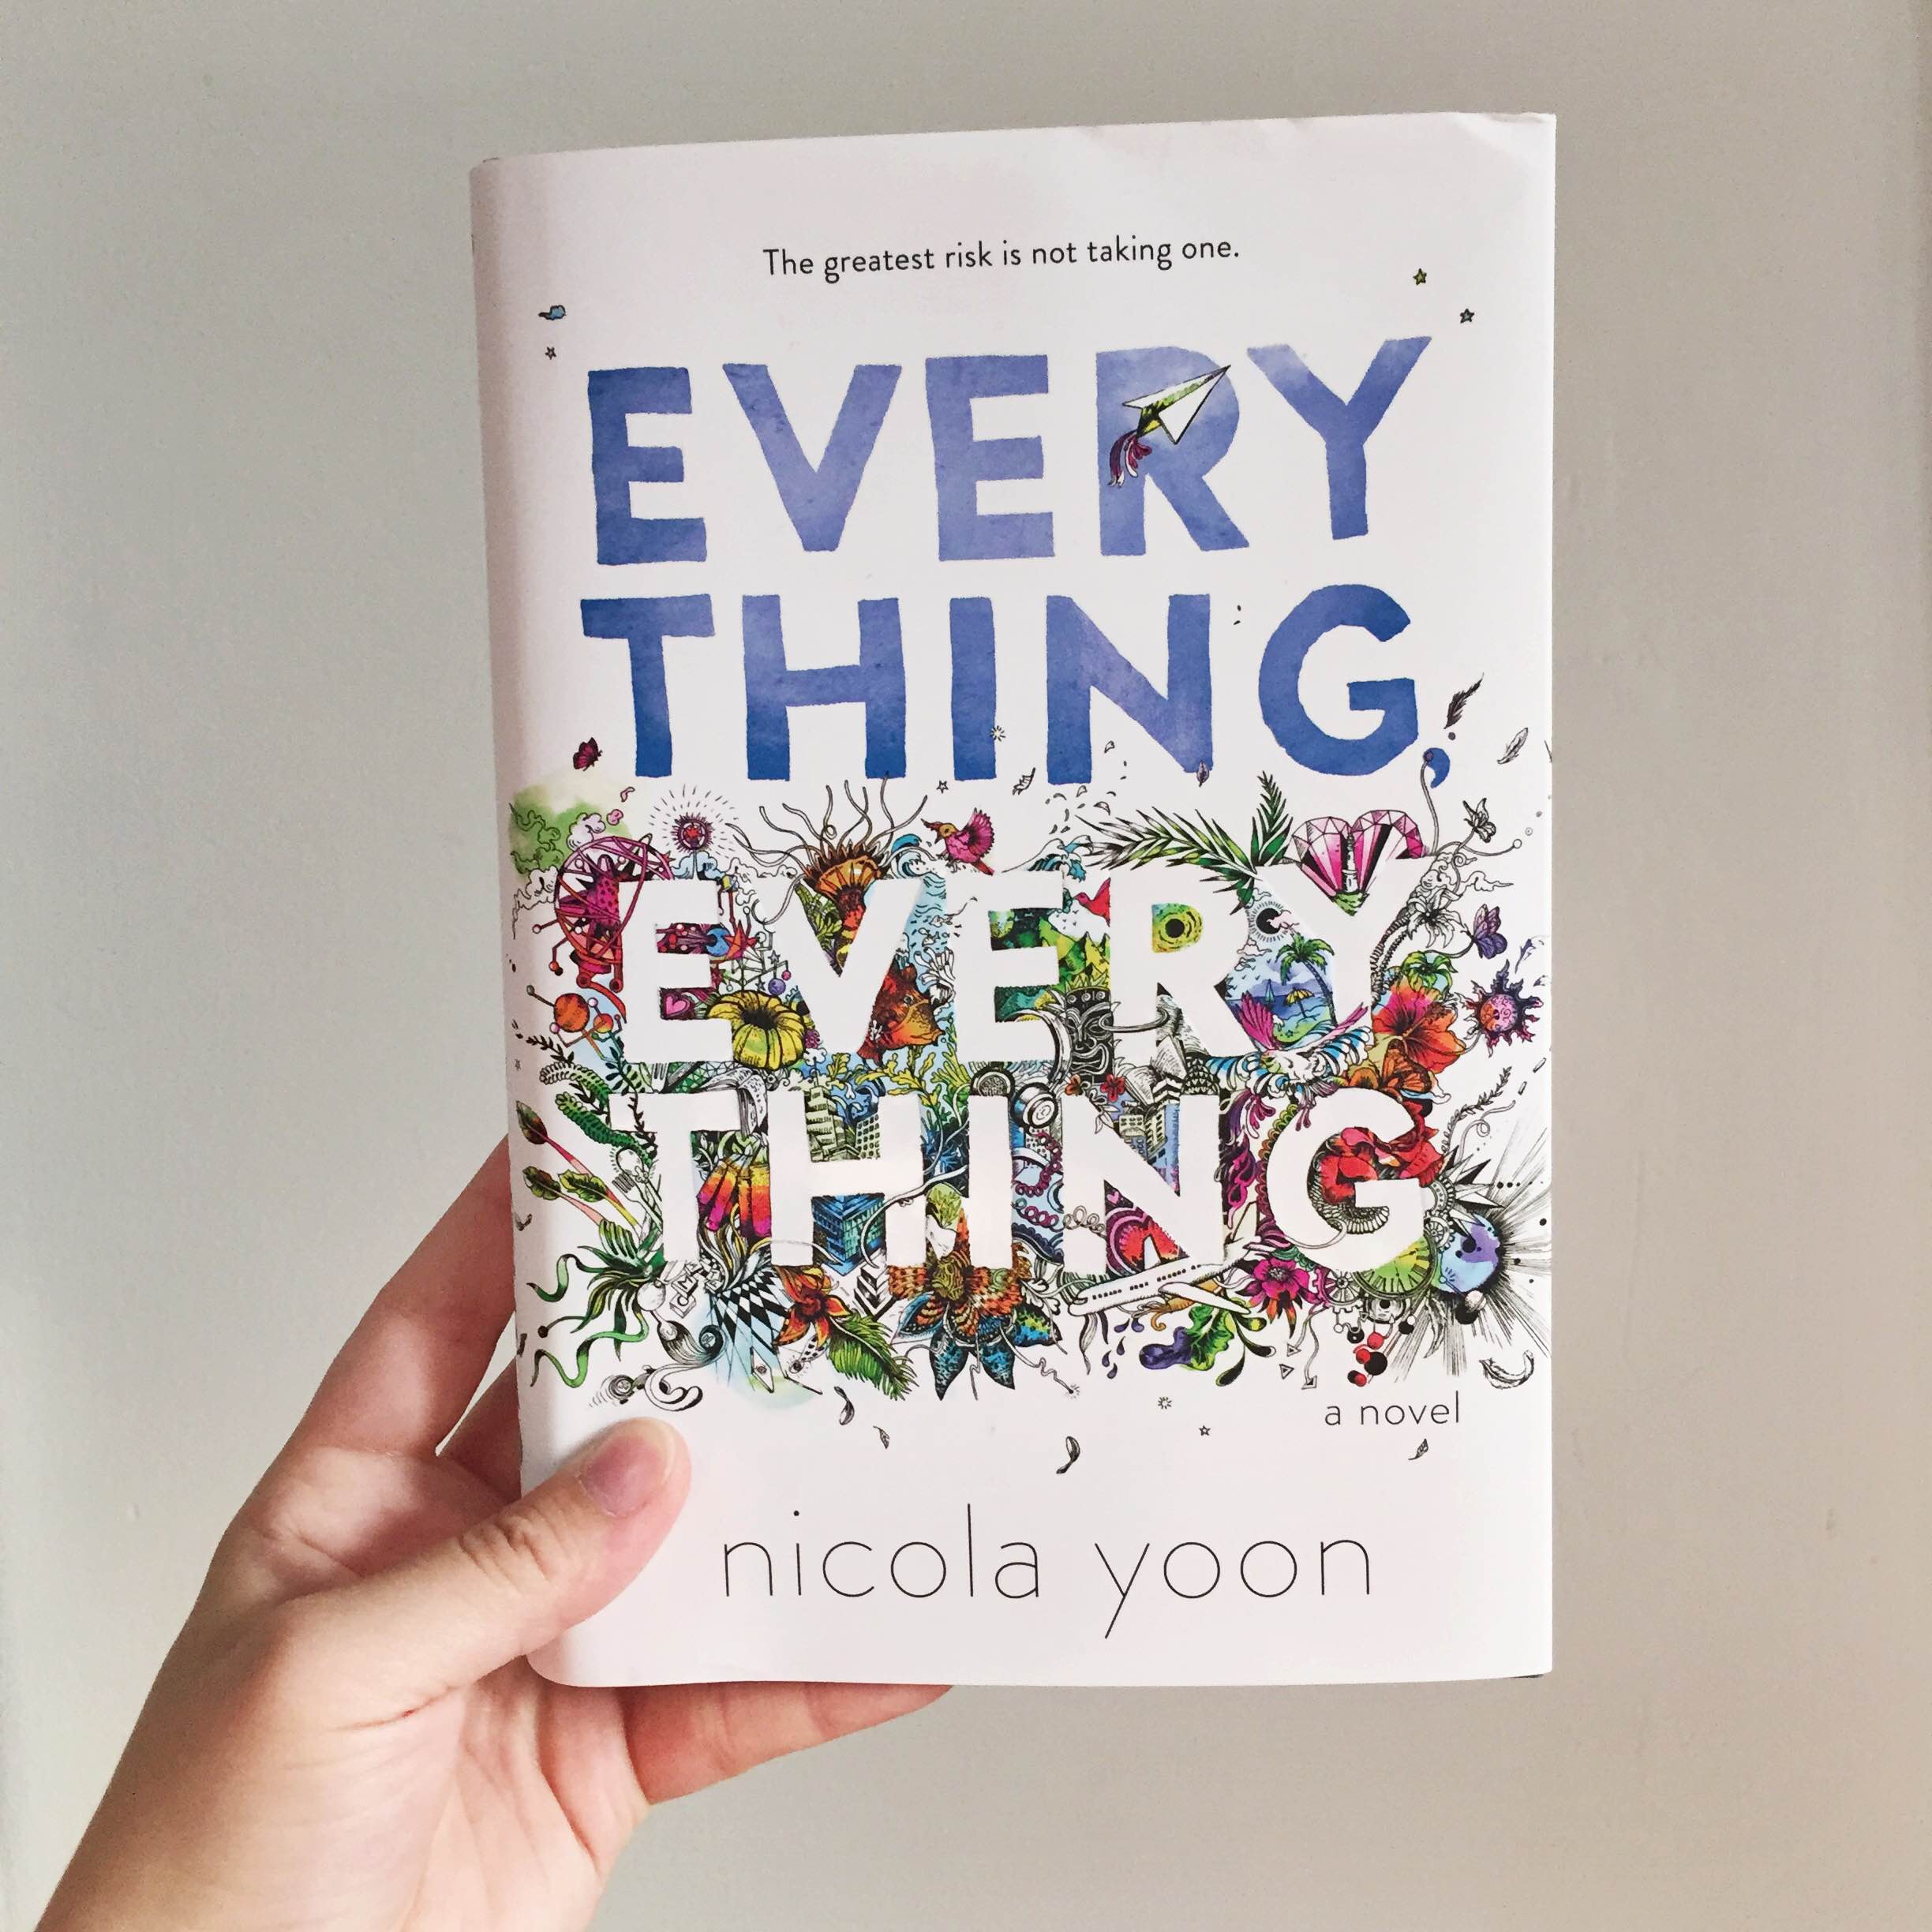 everything everything book review essay